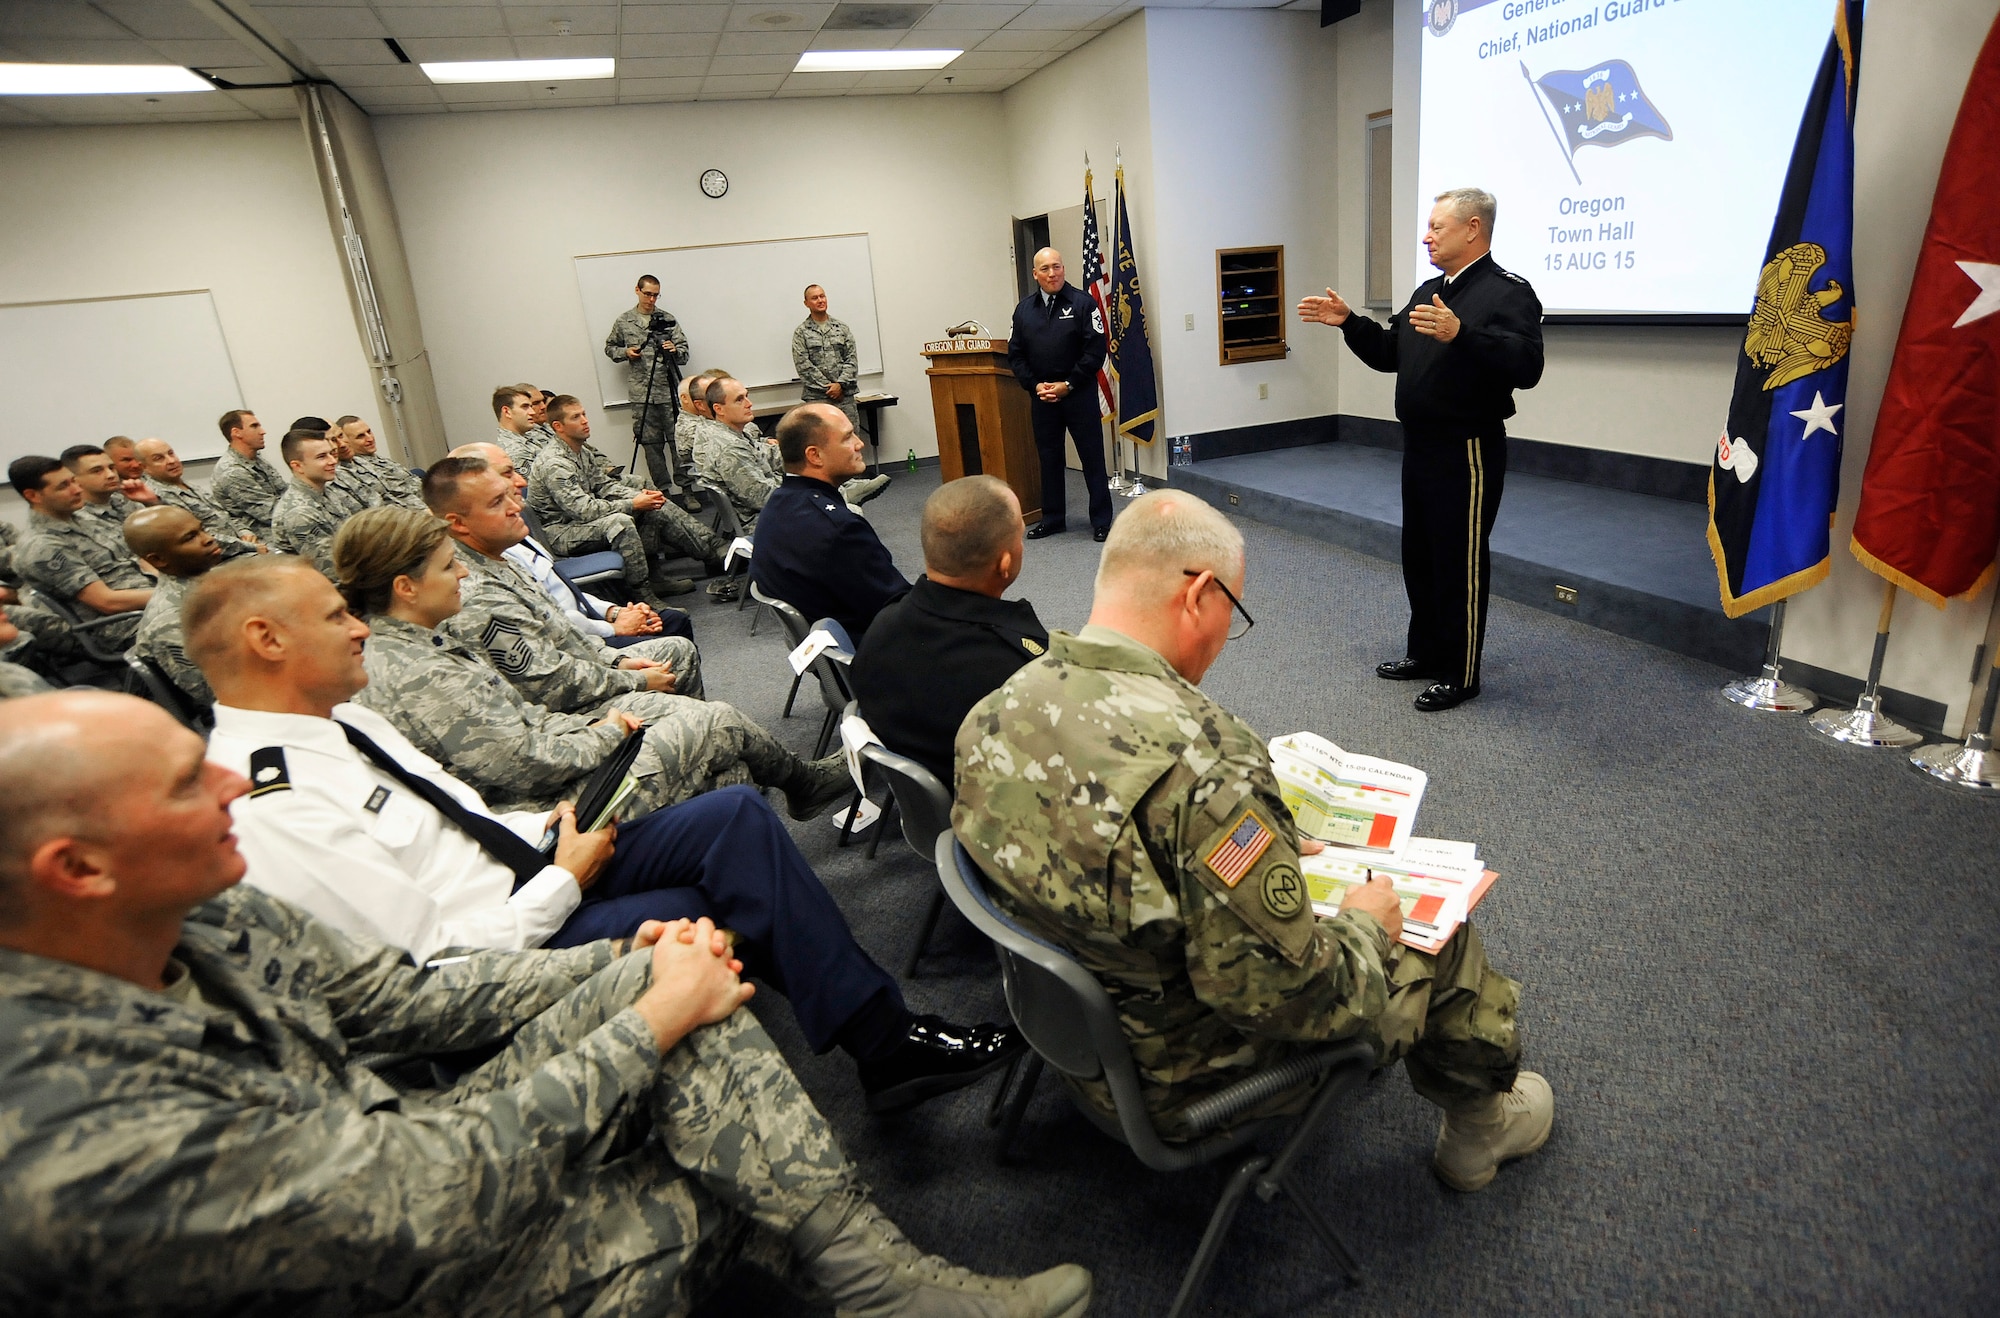 Army Gen. Frank J. Grass, Director of the National Guard Bureau and Air Force Chief Master Sgt. Mitchell O. Brush lead a town hall event at the Portland Air National Guard Base, Ore., Aug. 15, 2015. Both NGB leaders spent the day in Portland attending a variety of events. (U.S. Air National Guard photo by Tech. Sgt. John Hughel, 142nd Fighter Wing Public Affairs/Released)